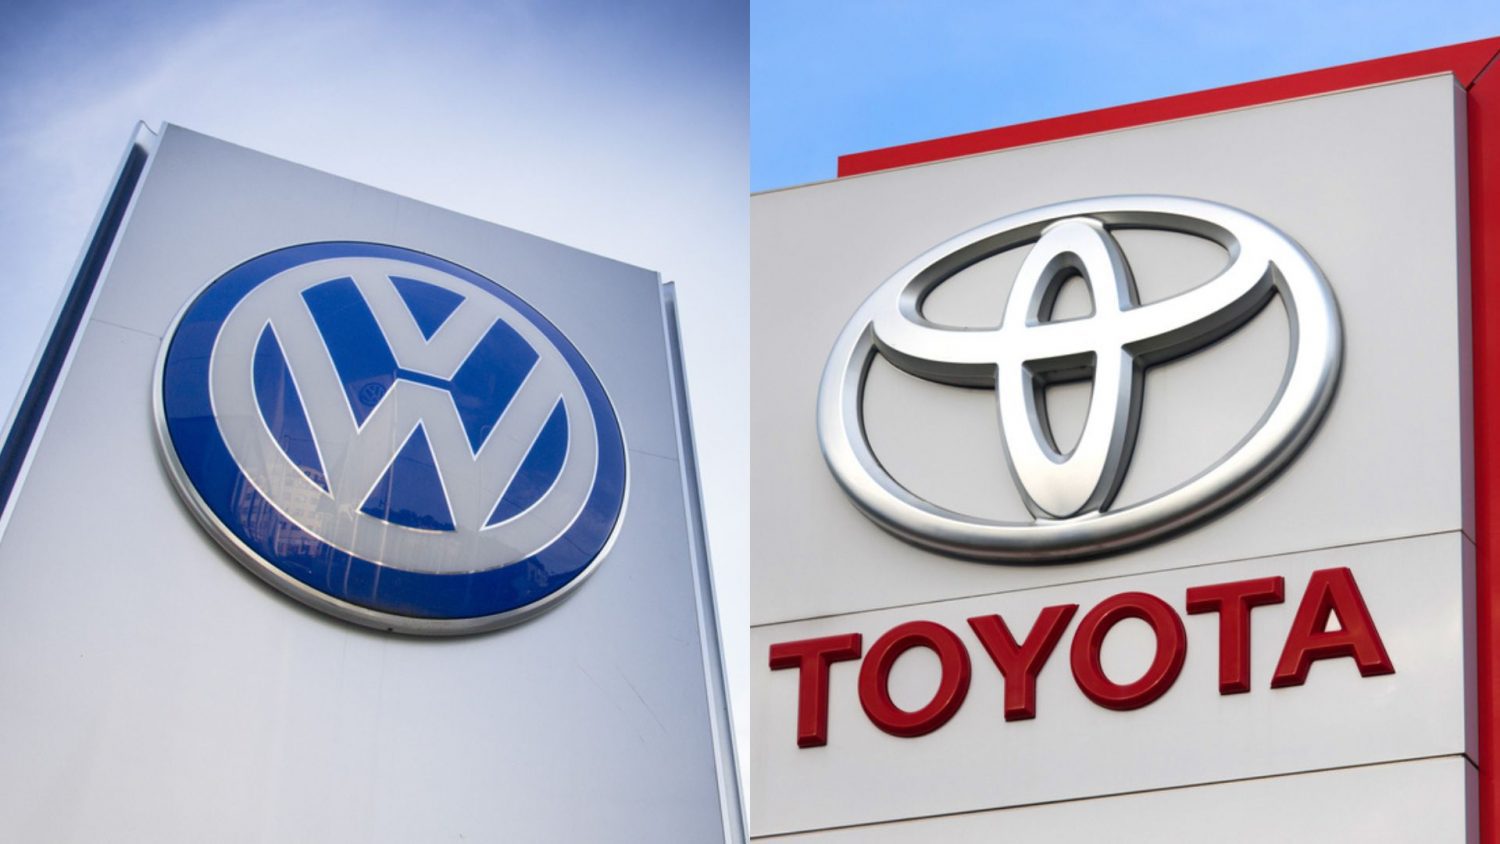 Volkswagen and Toyota announced recalls this week over issues creating fuel leaks and unexpected movements in thousands of vehicles.